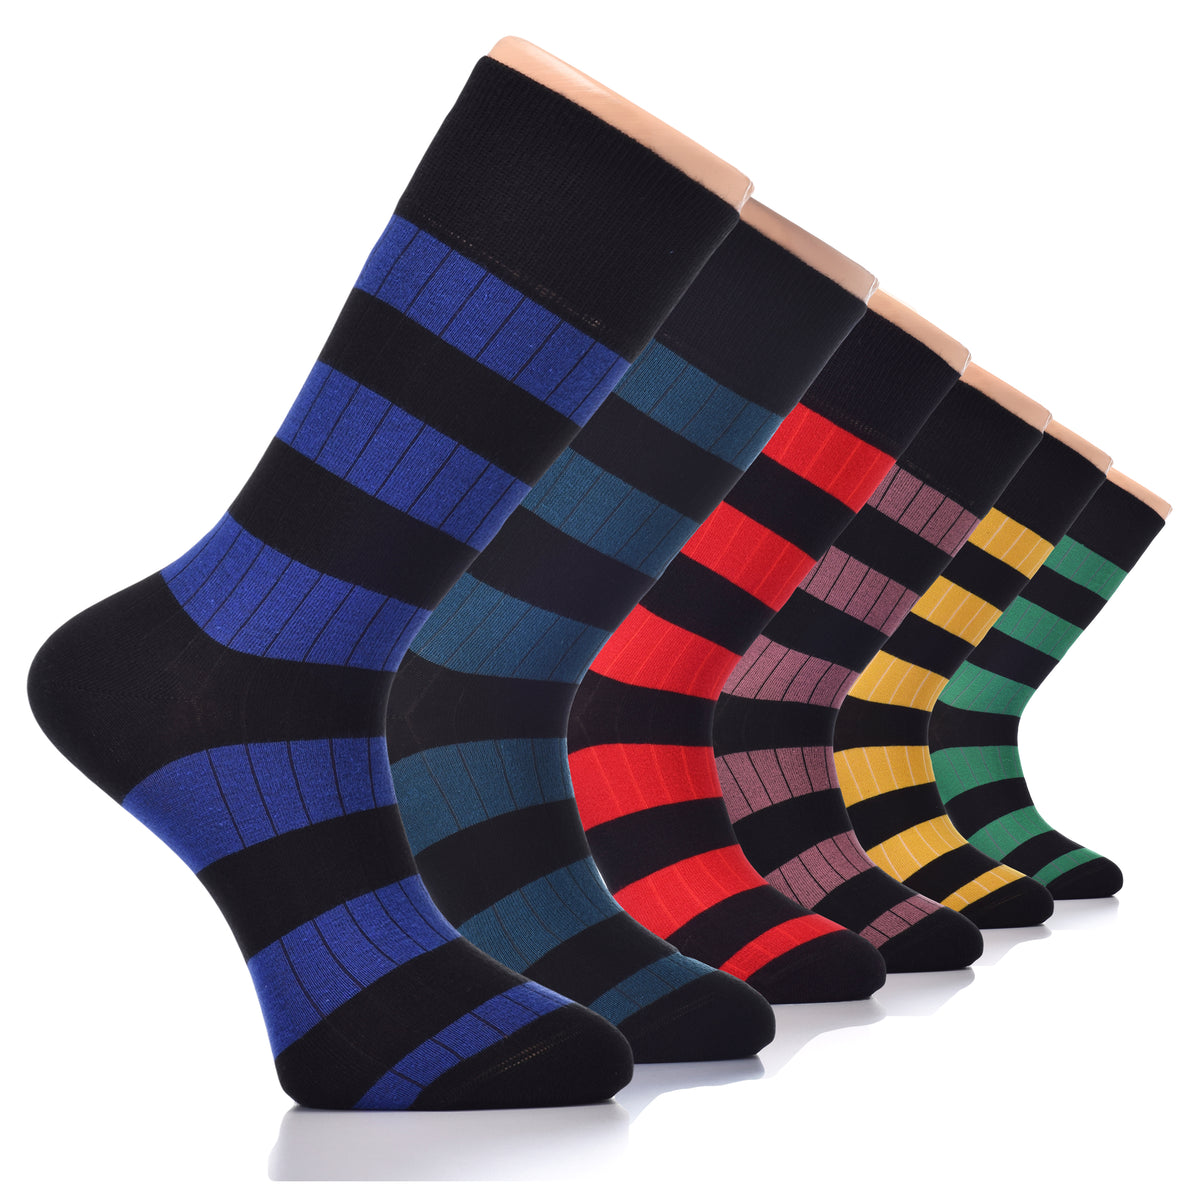 These Fancy Cotton Dress Crew socks come in six pairs of black, blue, red, green, and yellow stripes. Perfect for adding a pop of color to any outfit.